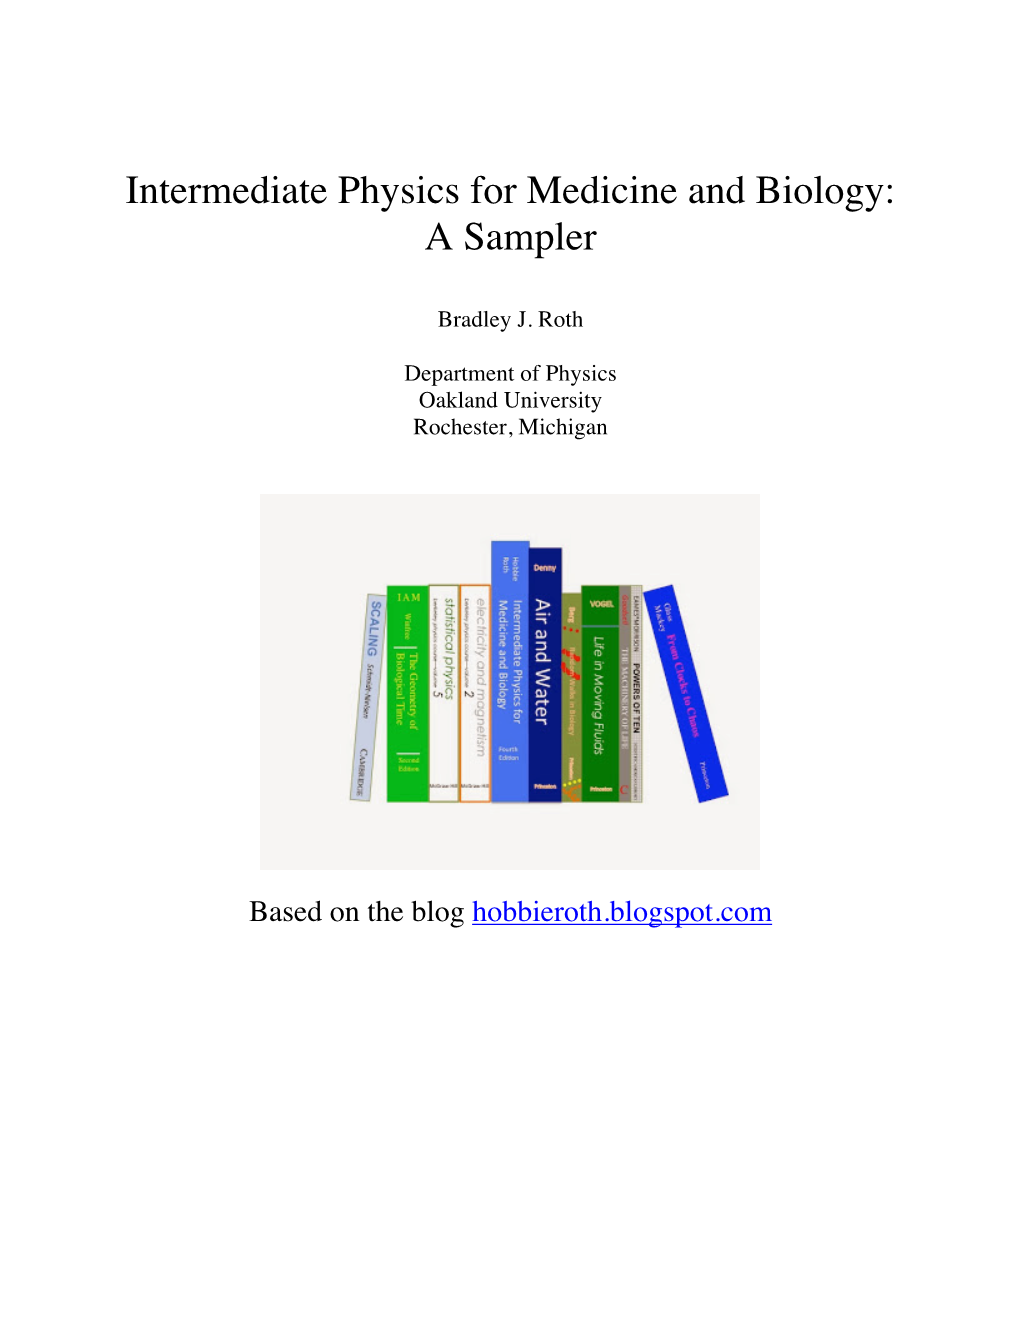 Intermediate Physics for Medicine and Biology: a Sampler